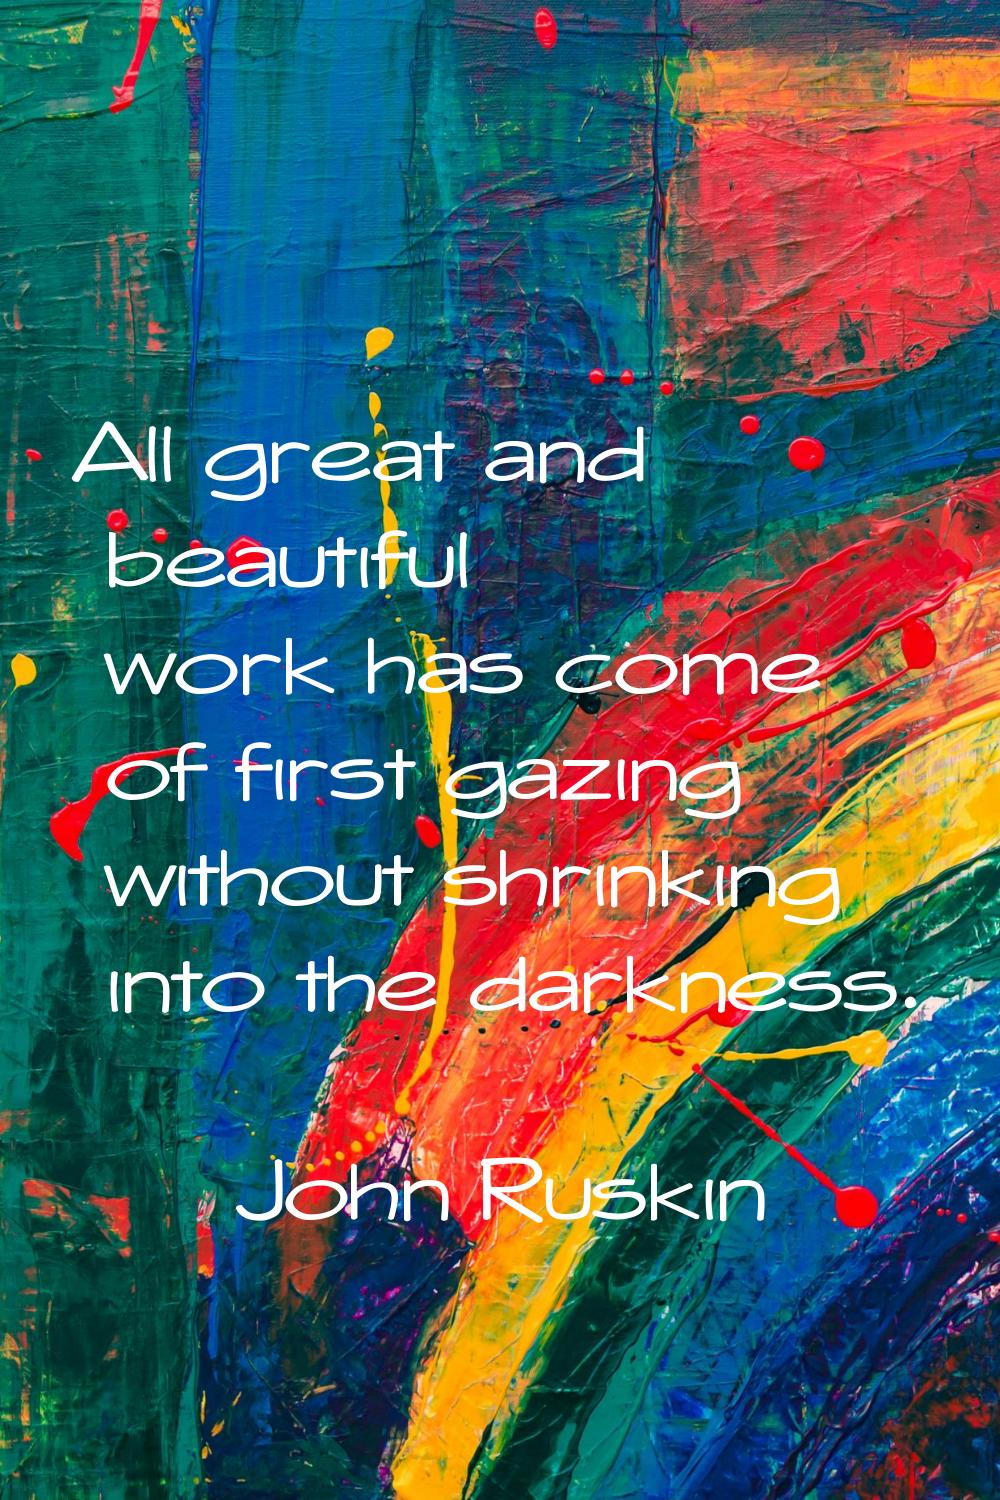 All great and beautiful work has come of first gazing without shrinking into the darkness.